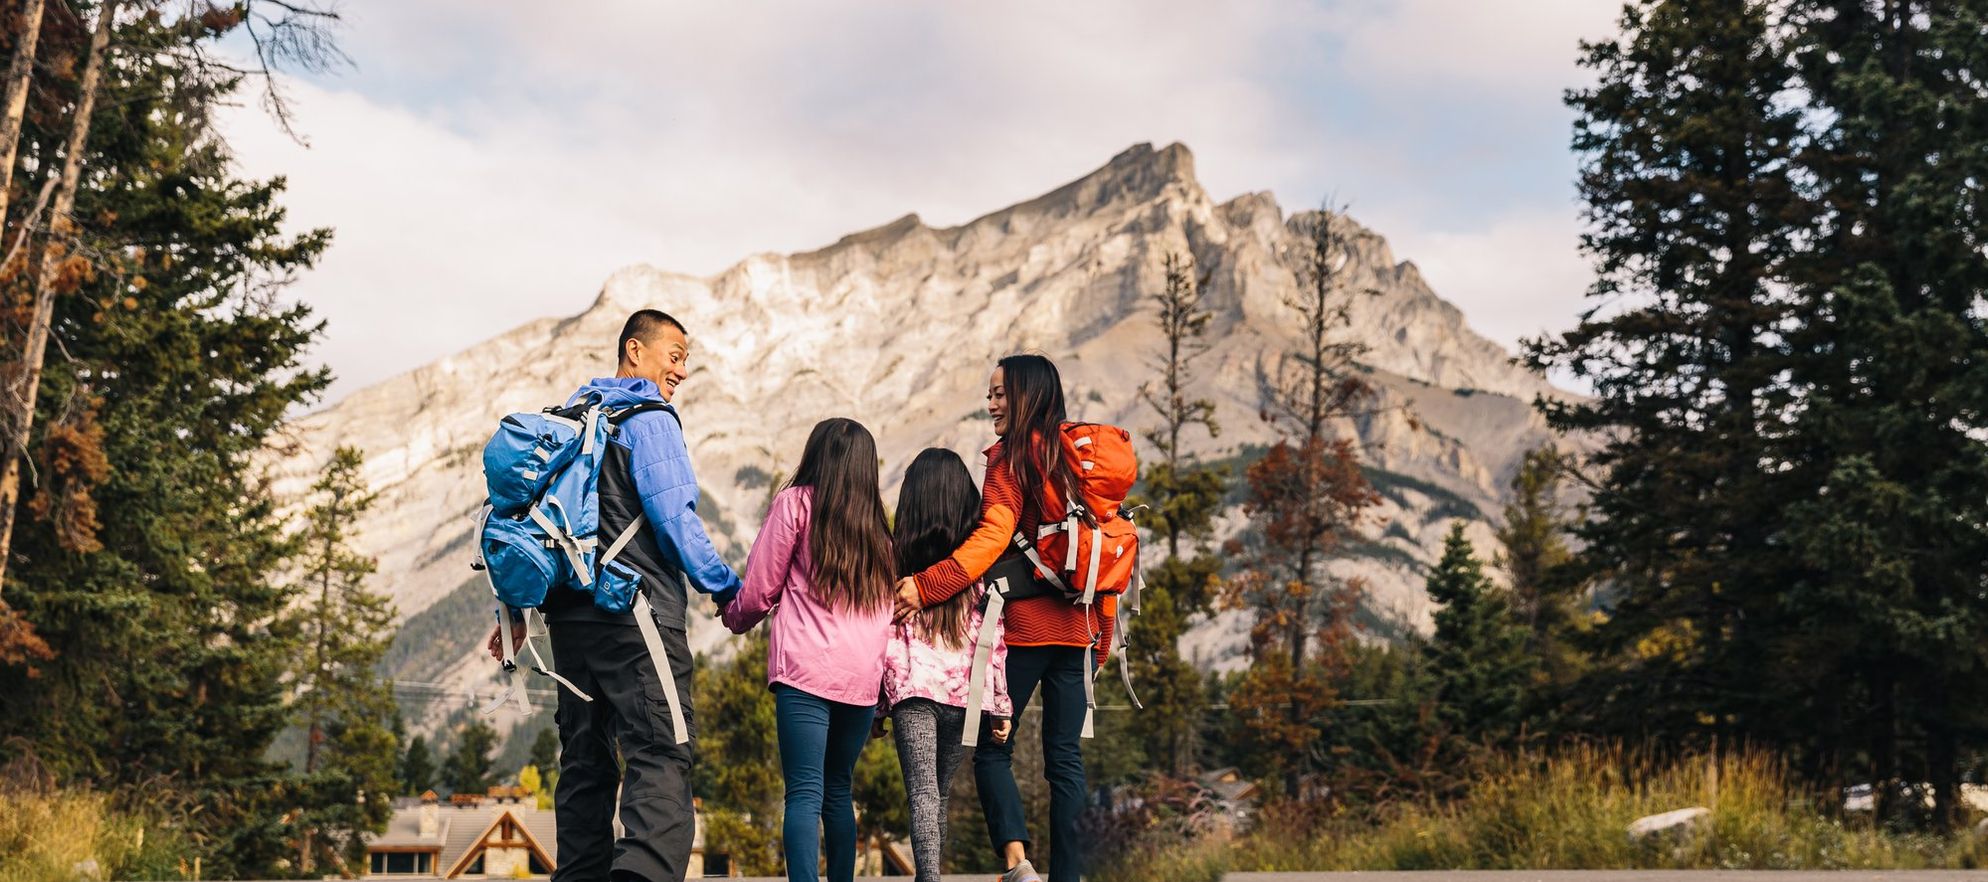 Summer Itineraries: A 3 Day Family Adventure in Banff National Park ...